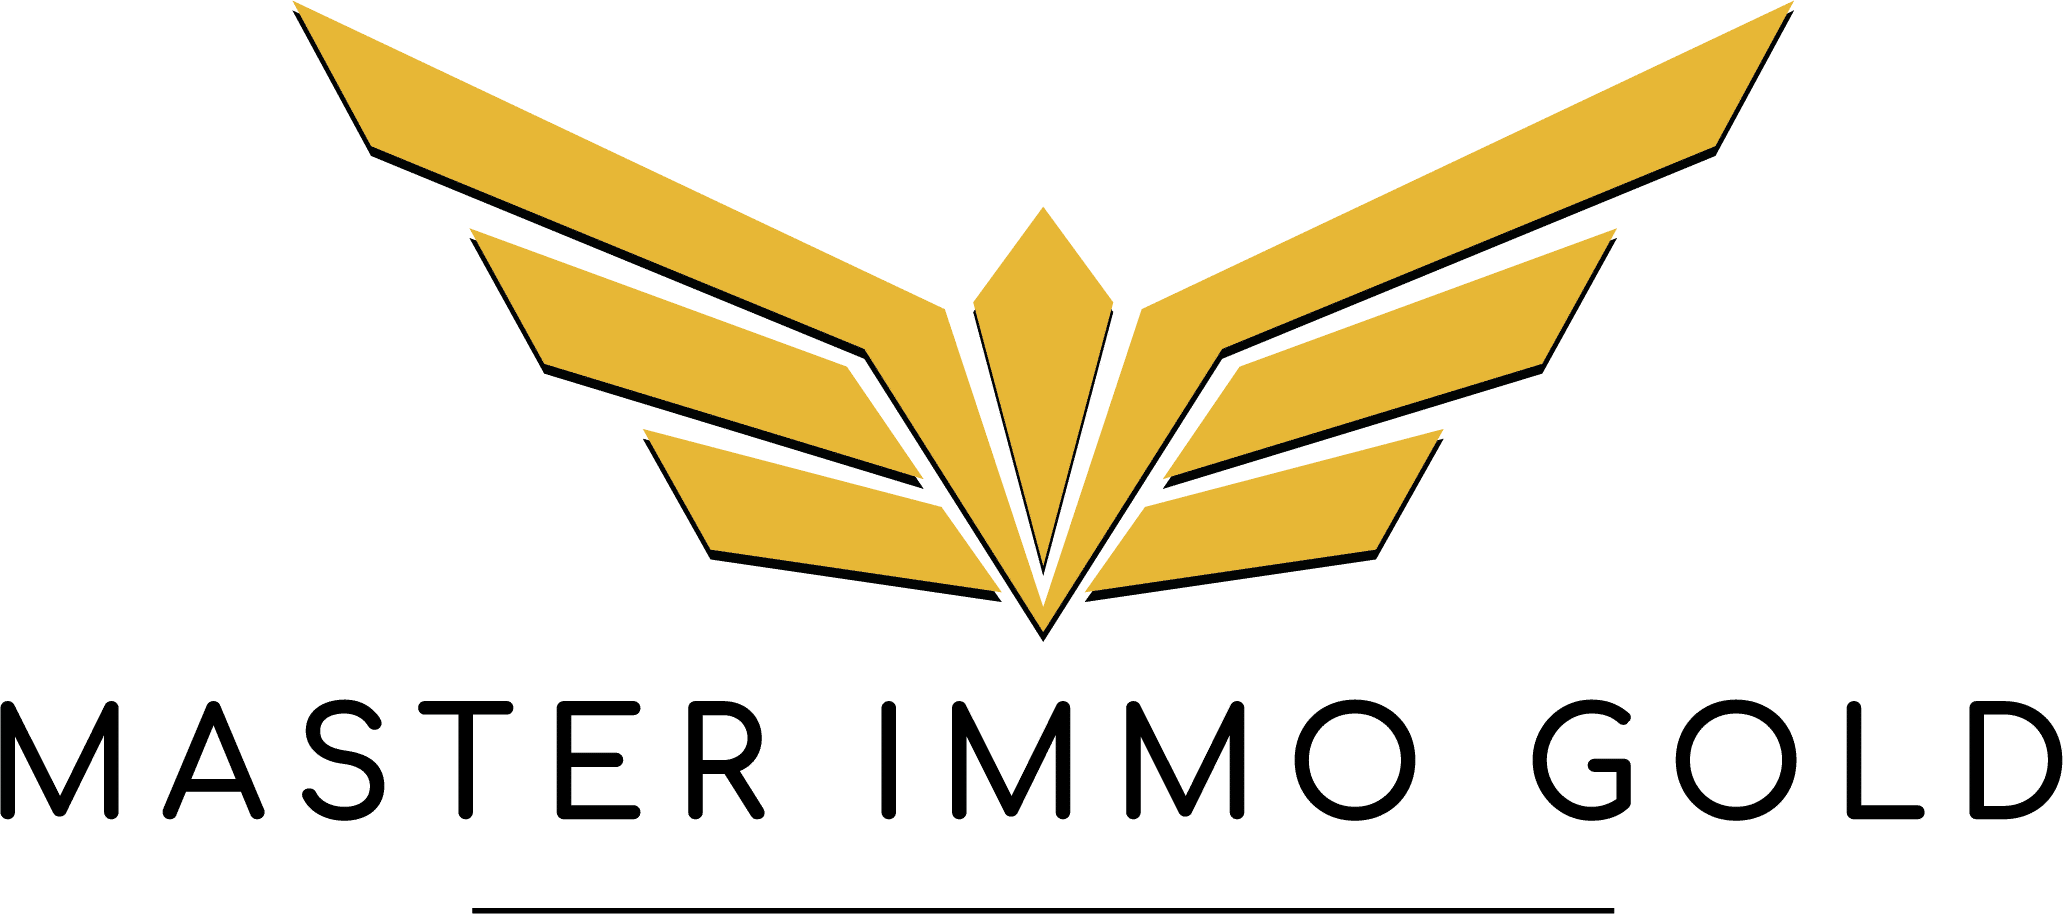 Master Immo Gold